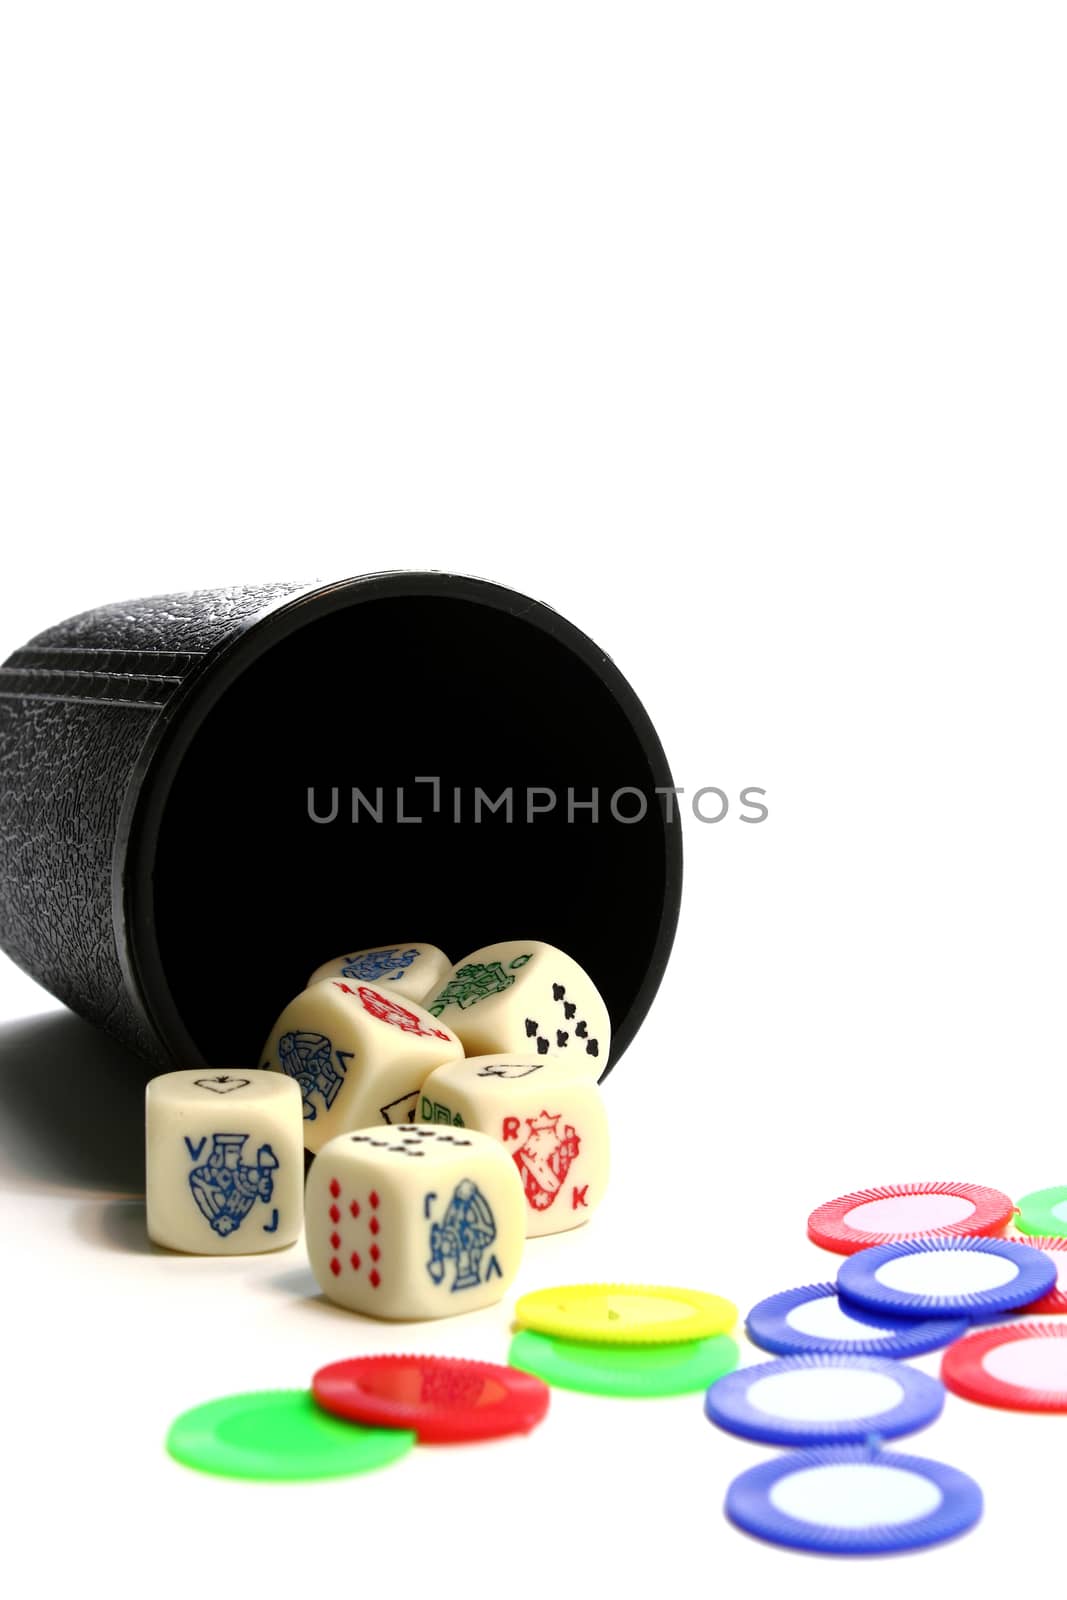 Fortune play by dynamicfoto